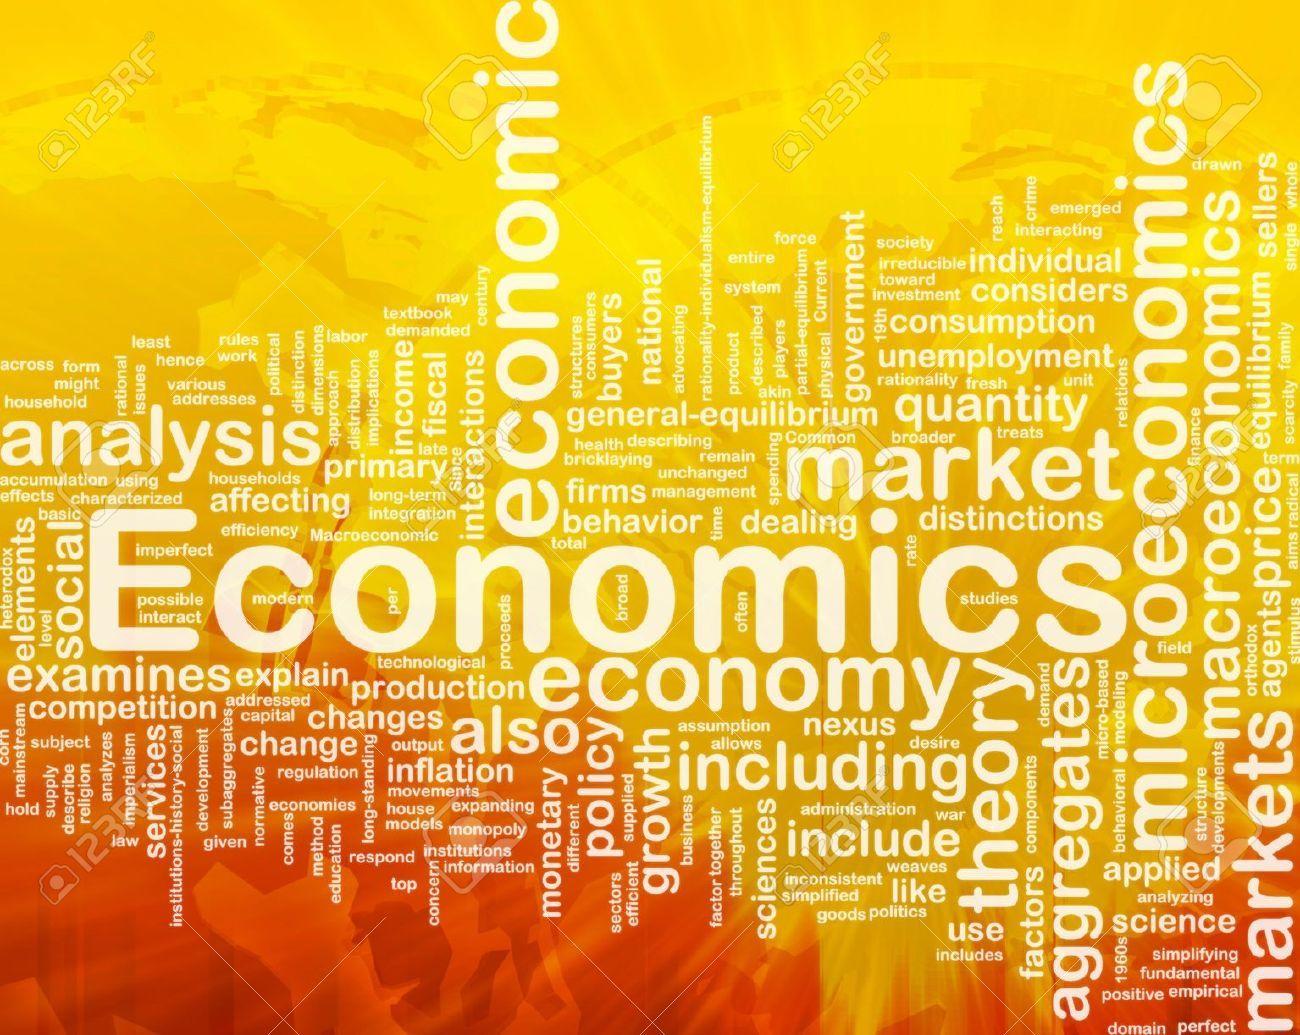 Economy HD Wallpaper, For Free Download